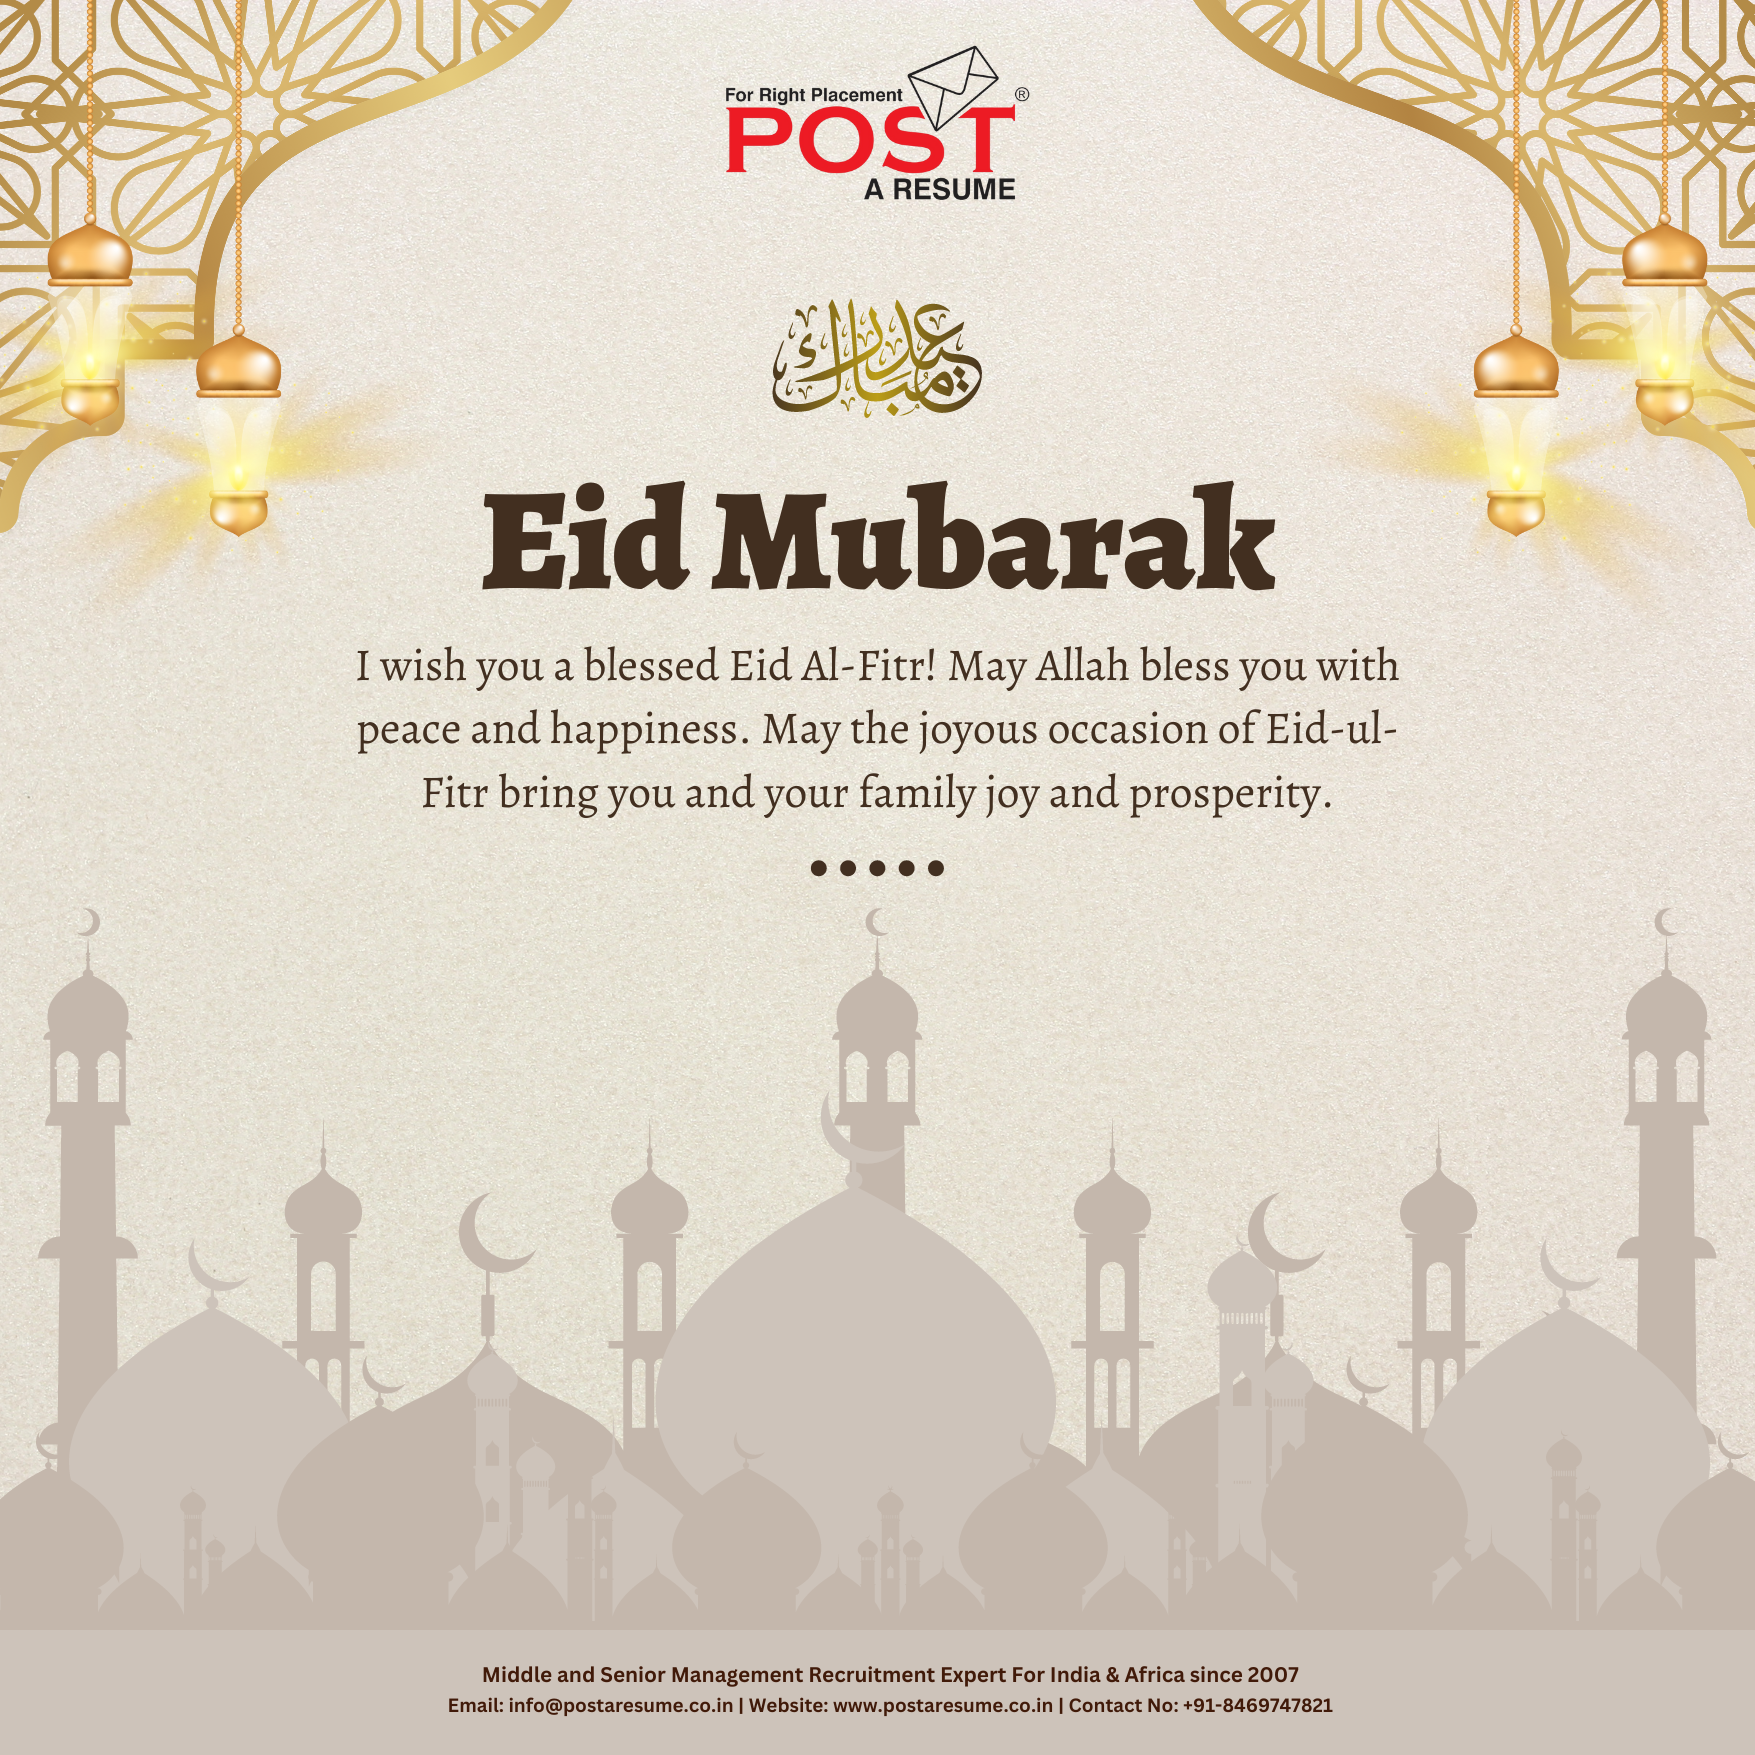 Eid Mubarak! Wishing you and your loved ones joy, peace, and prosperity on this blessed occasion.